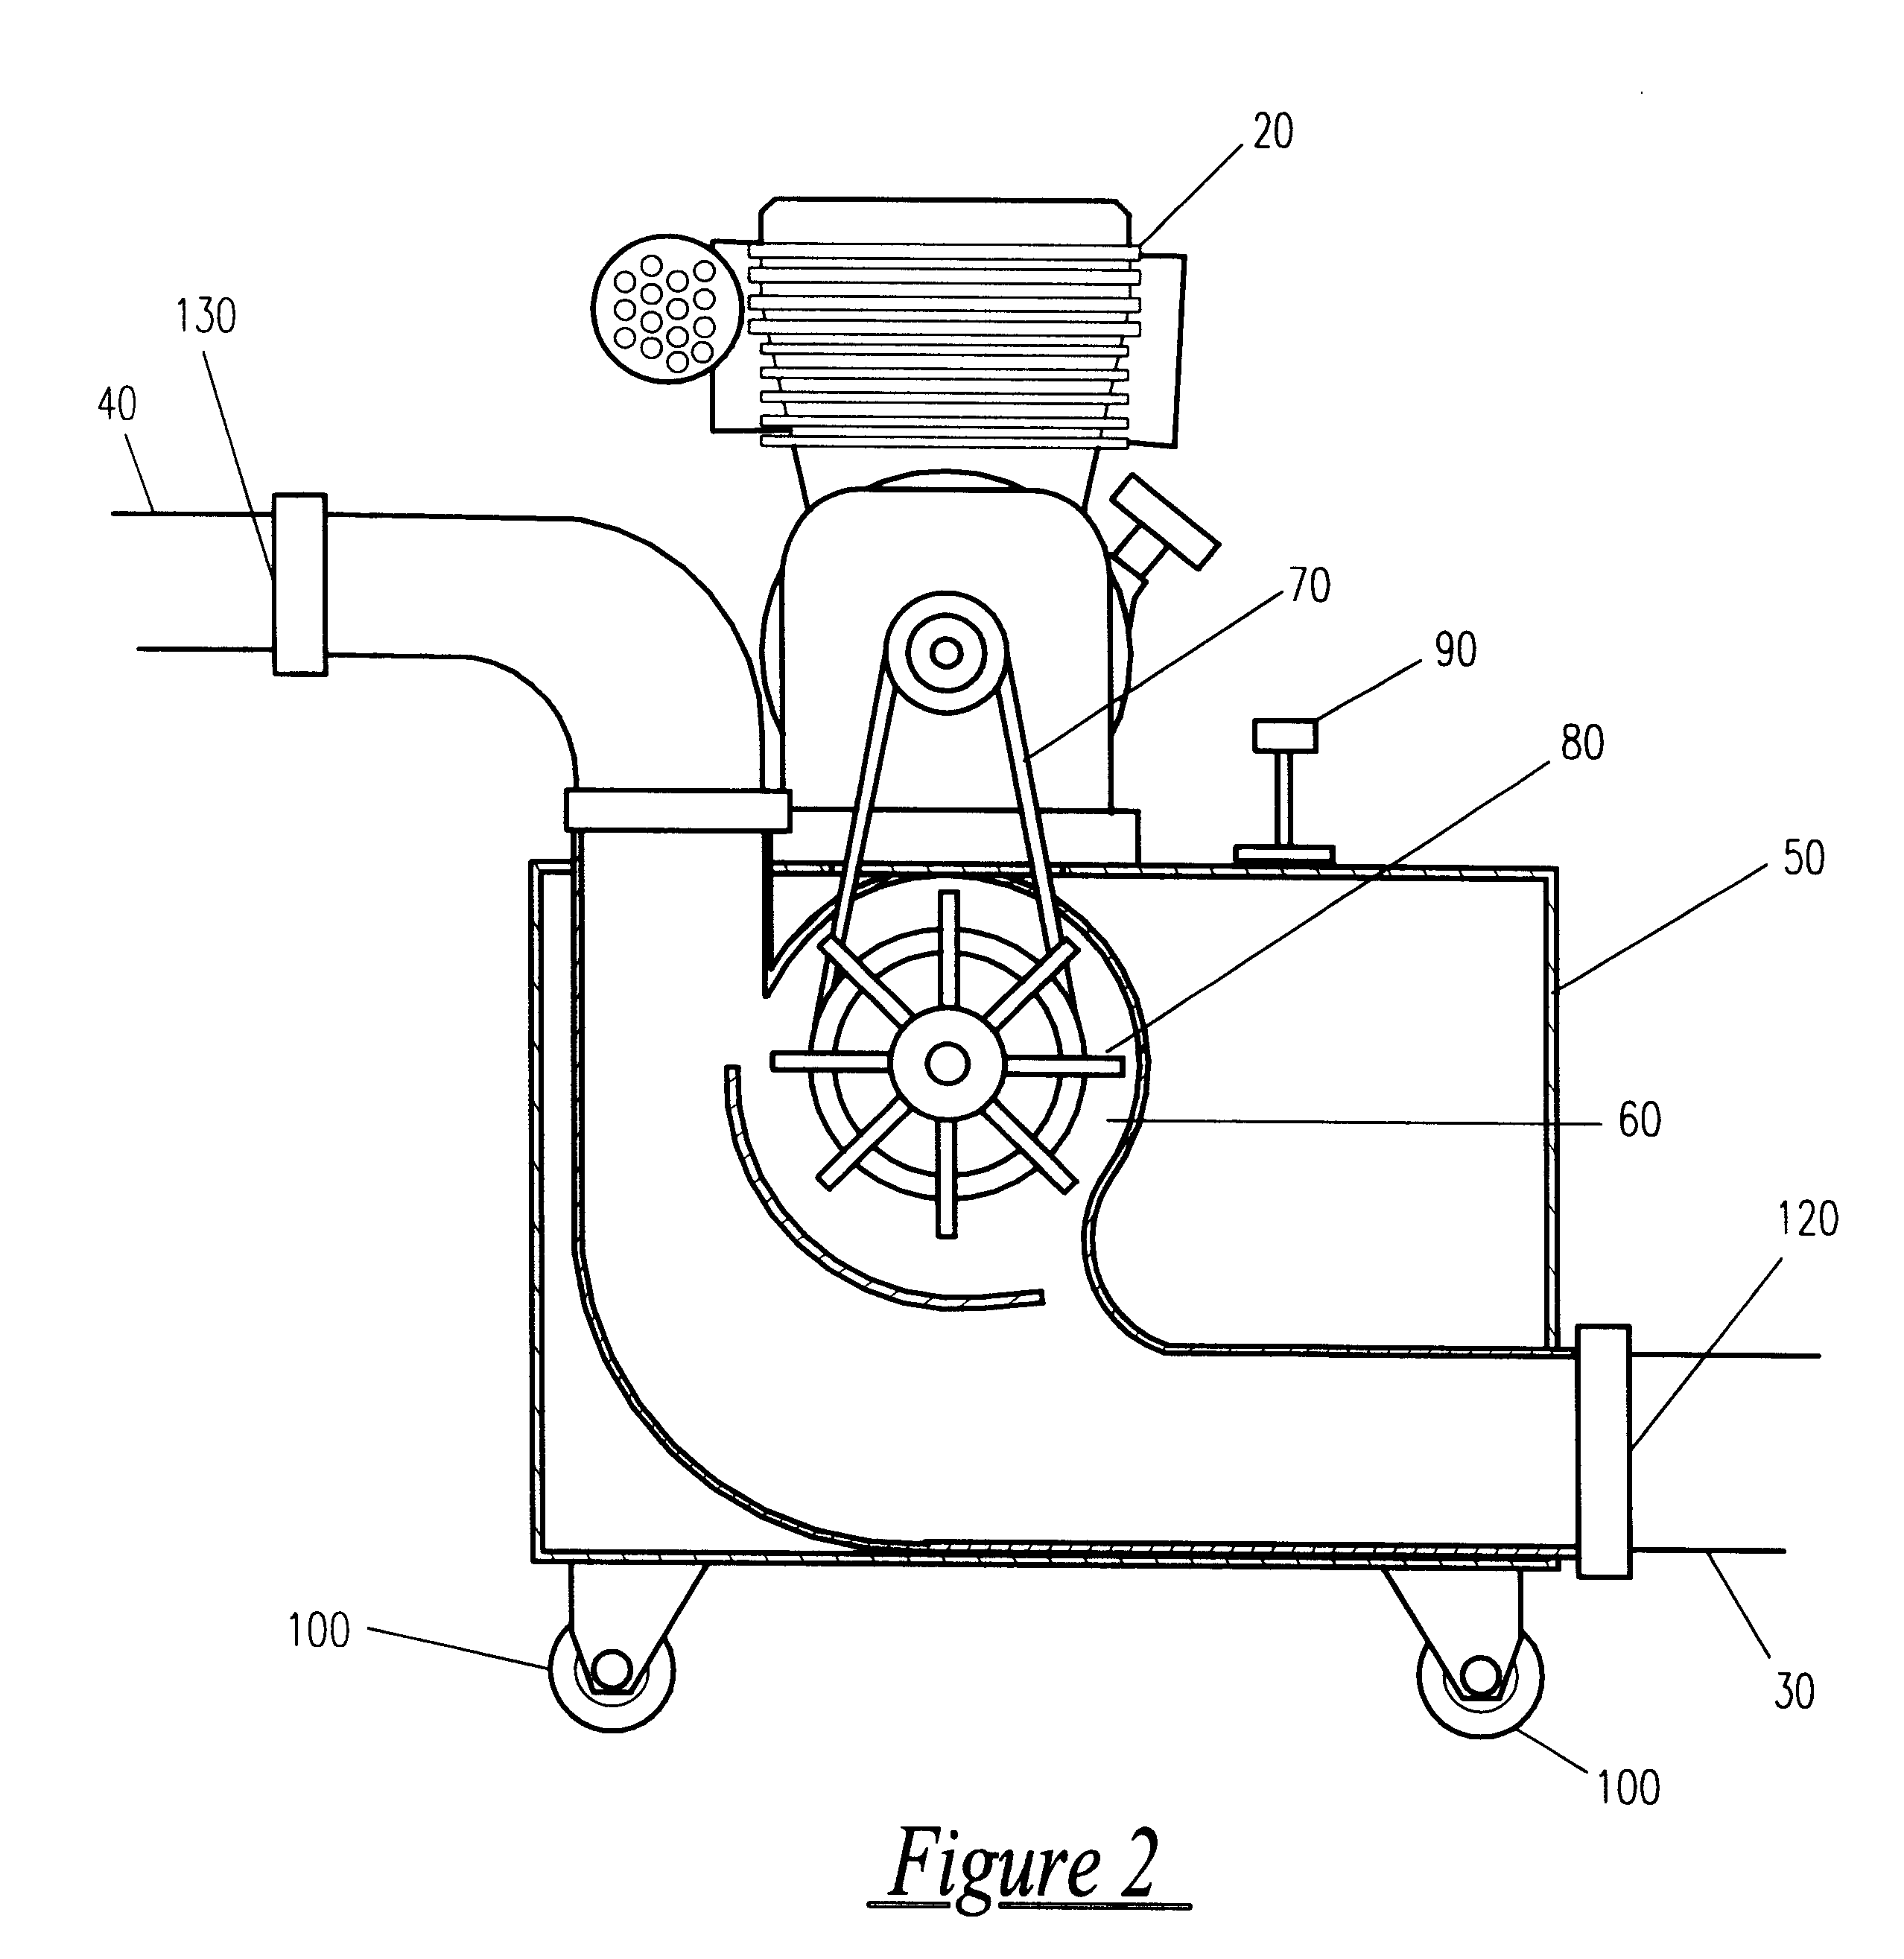 Portable, gas-powered, general purposes, pneumatic transport device